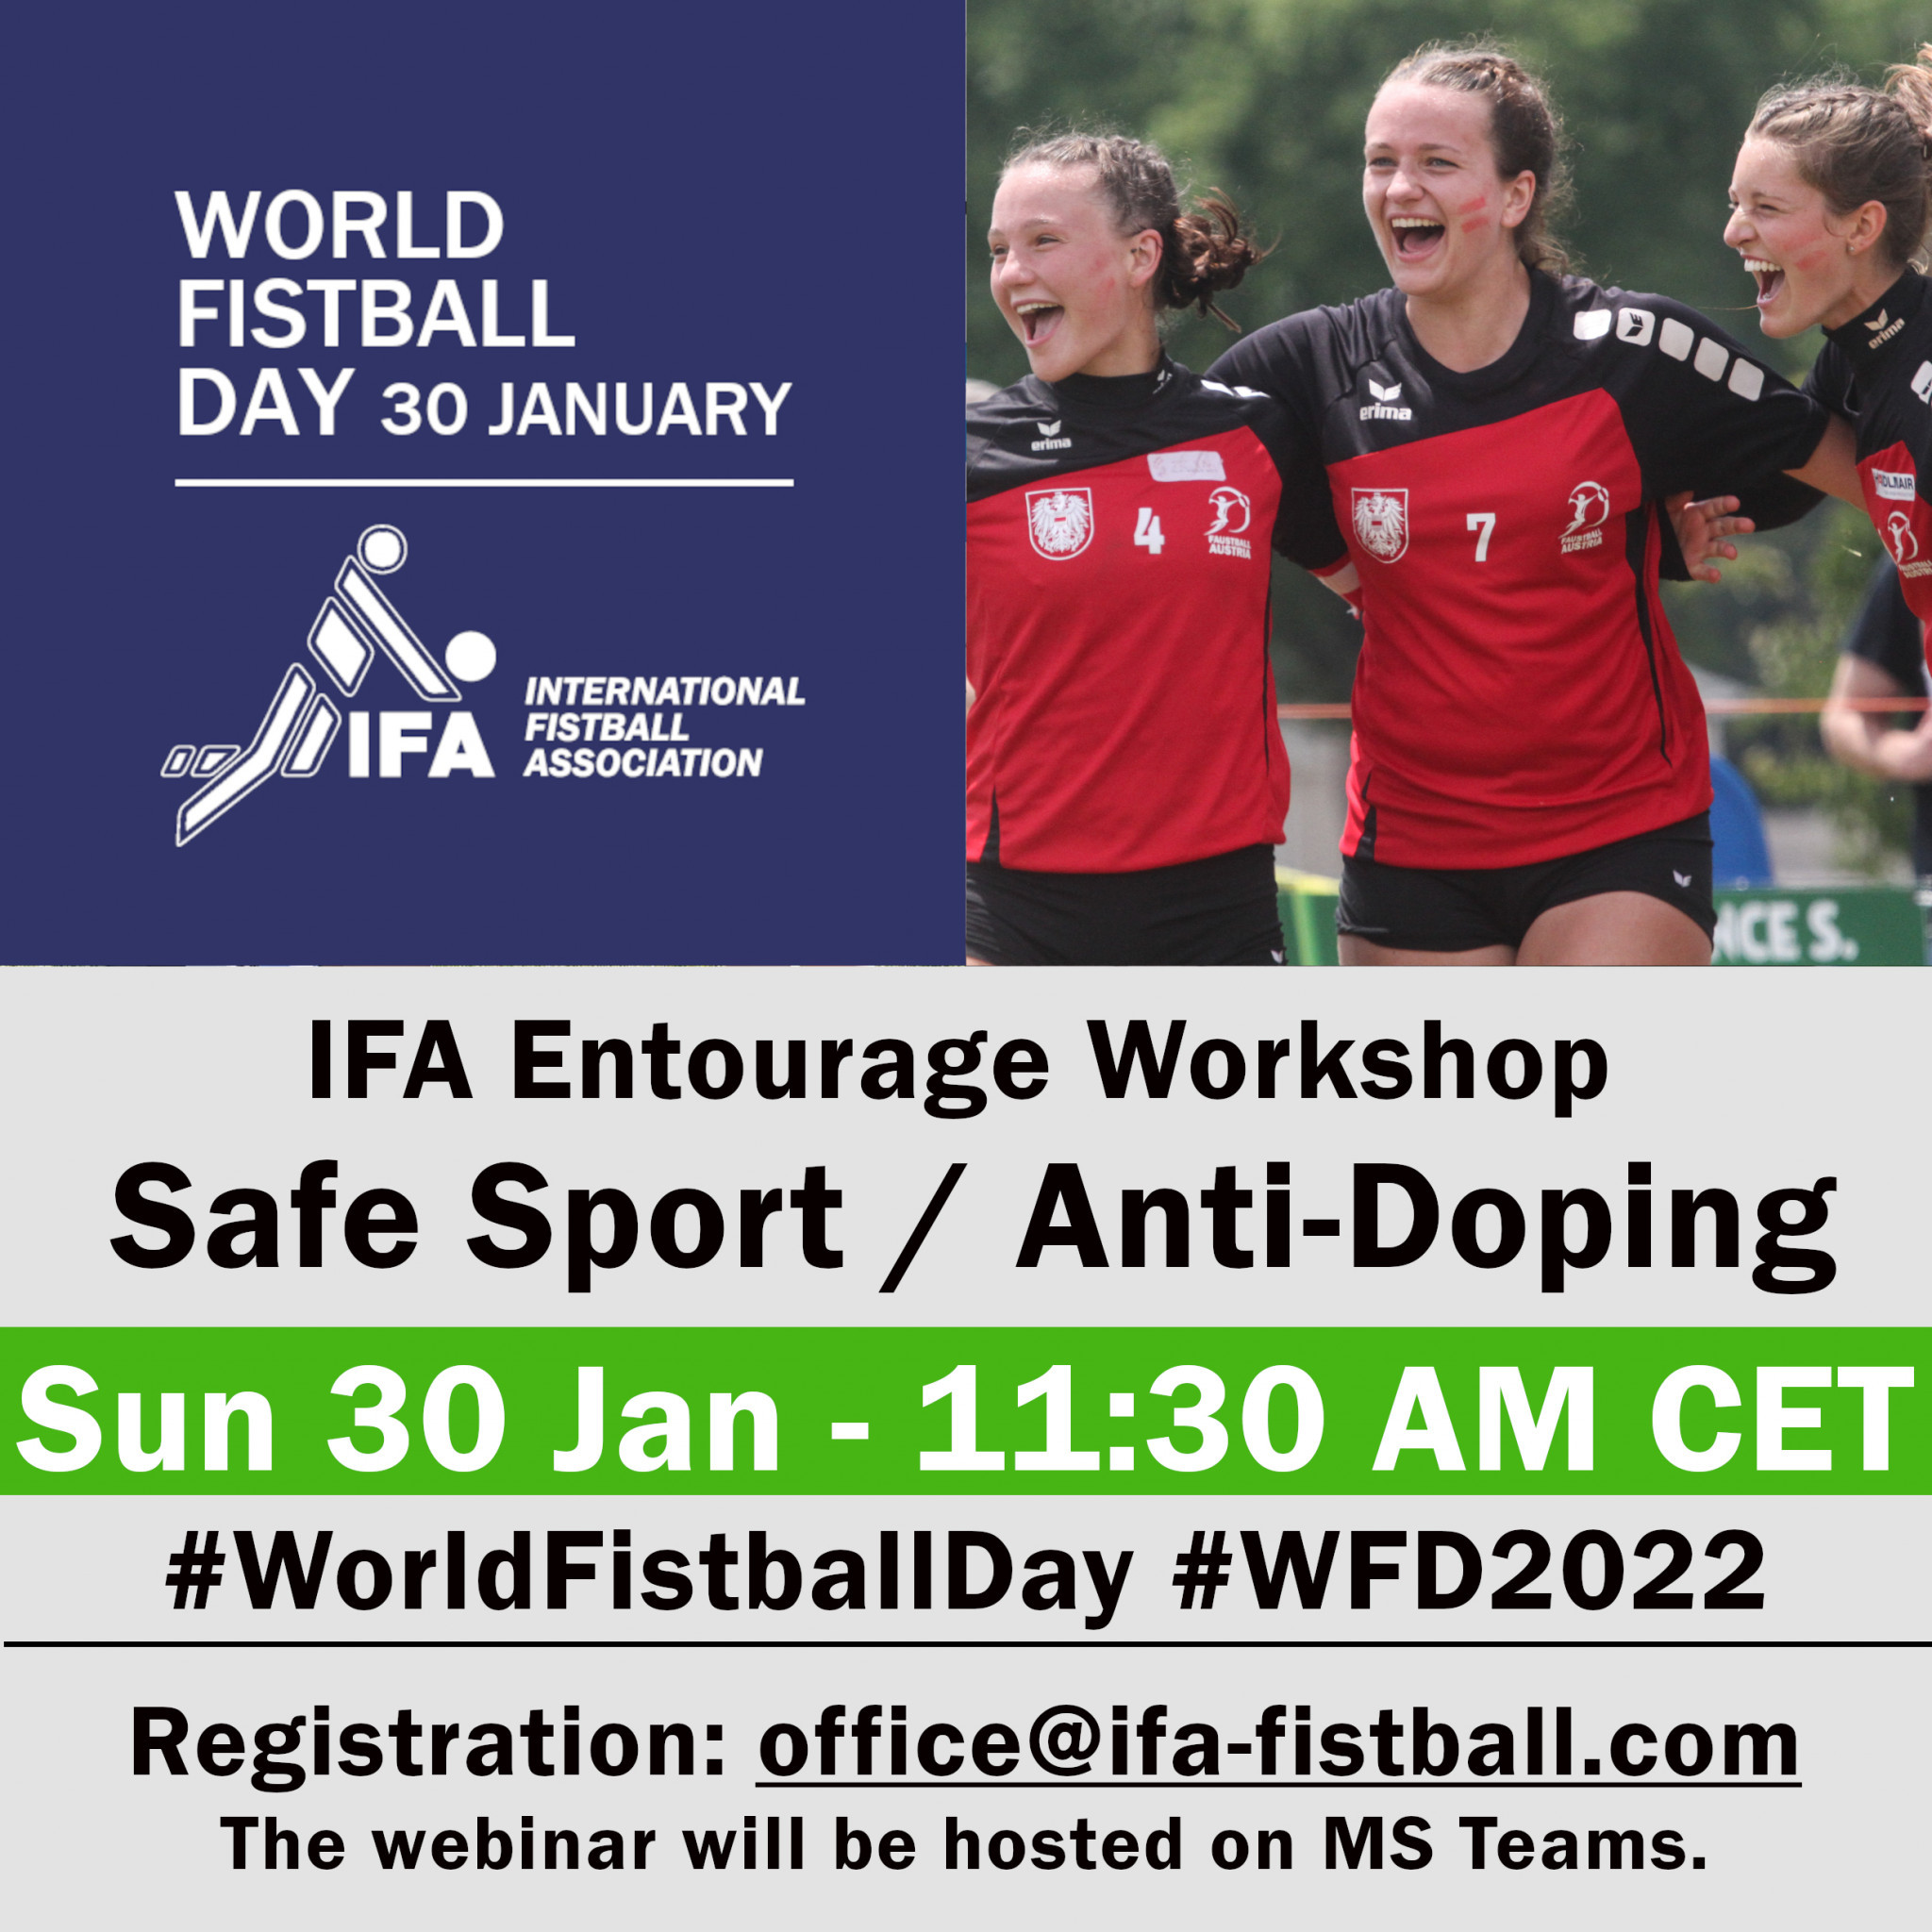 A workshop on safe sport and anti-doping will be one of the events held on the day ©IFA